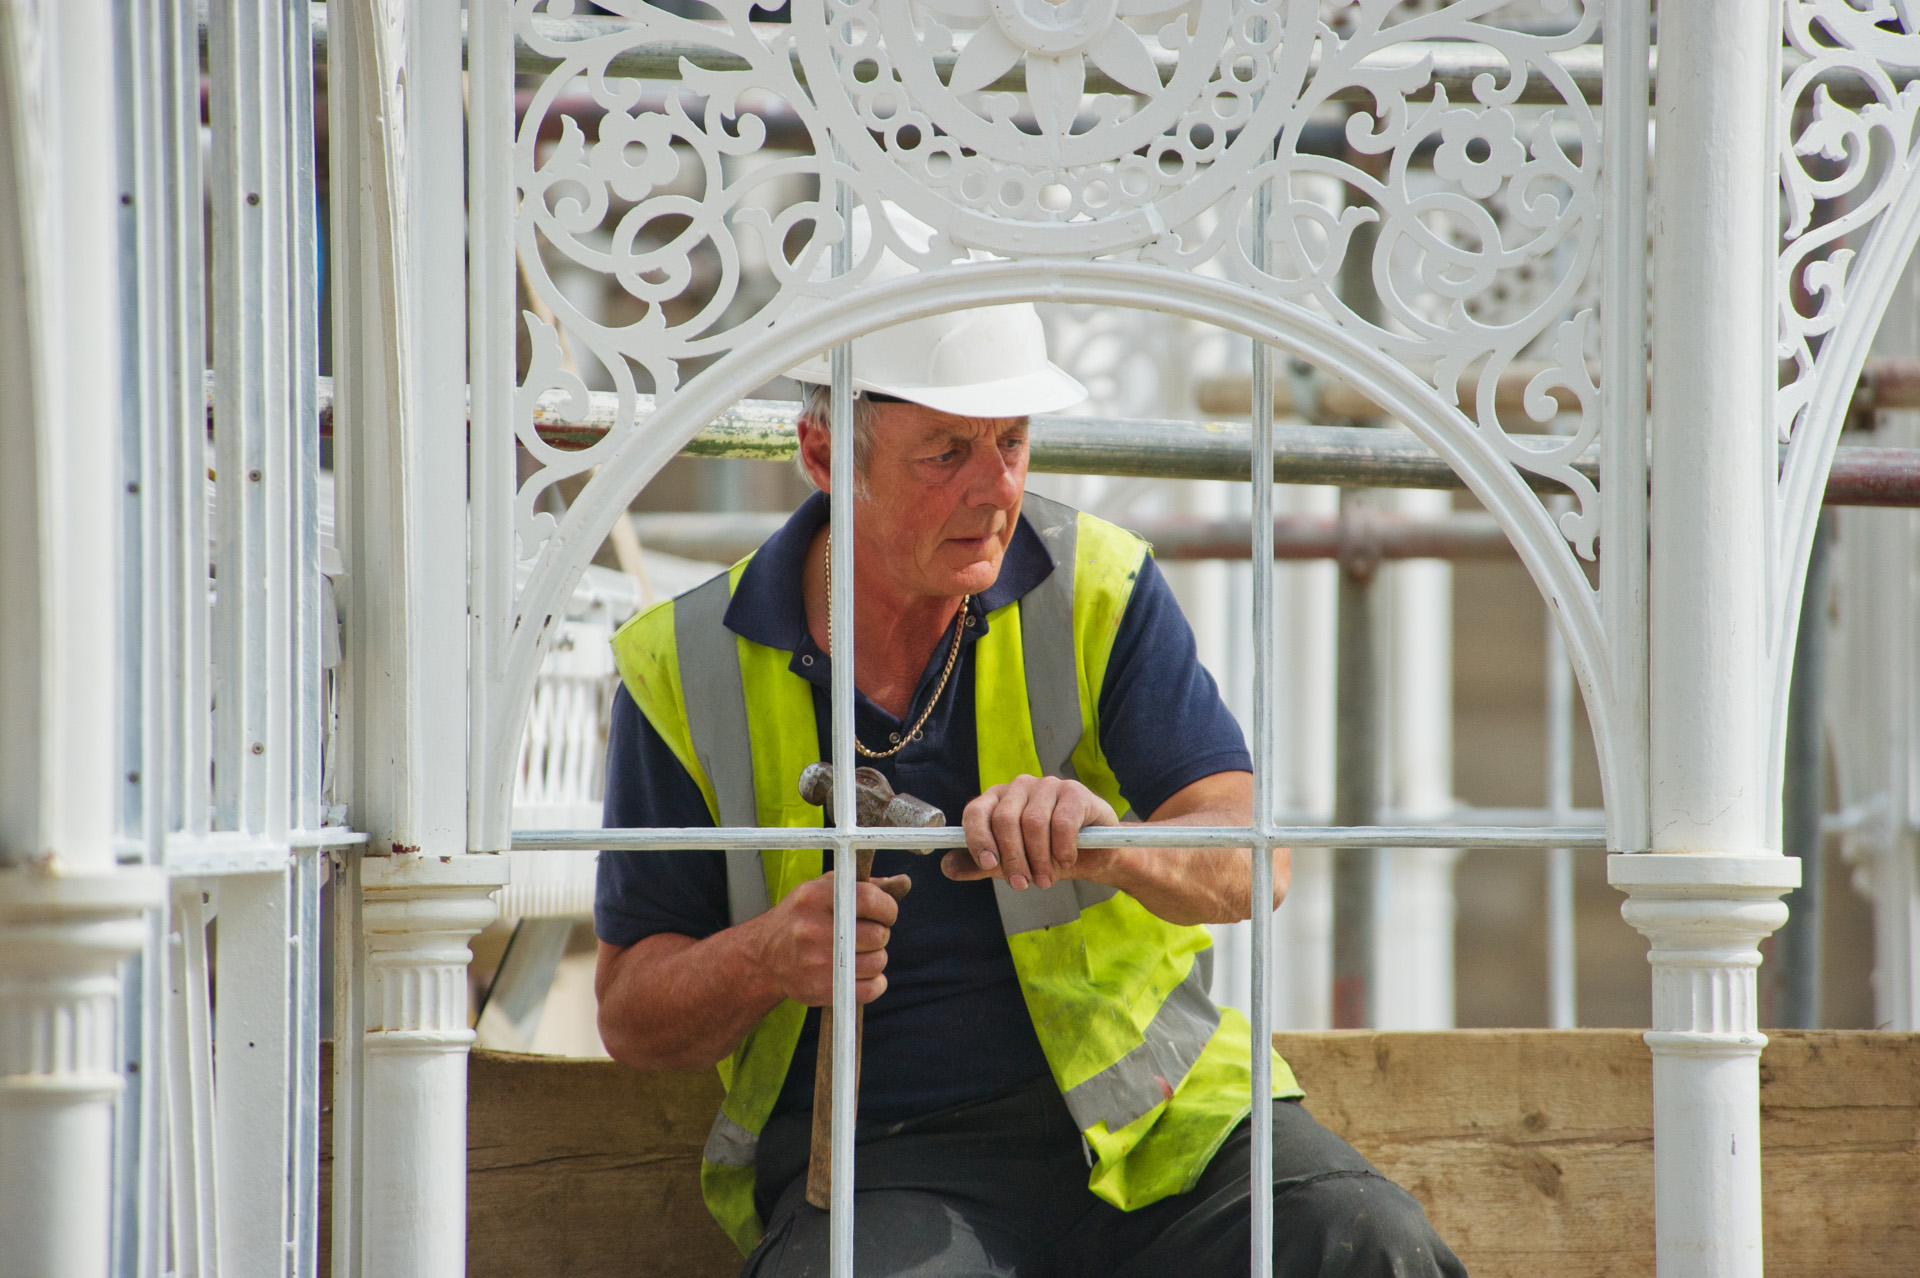 A worker renovating the greenhouse at Wentworth Castle.